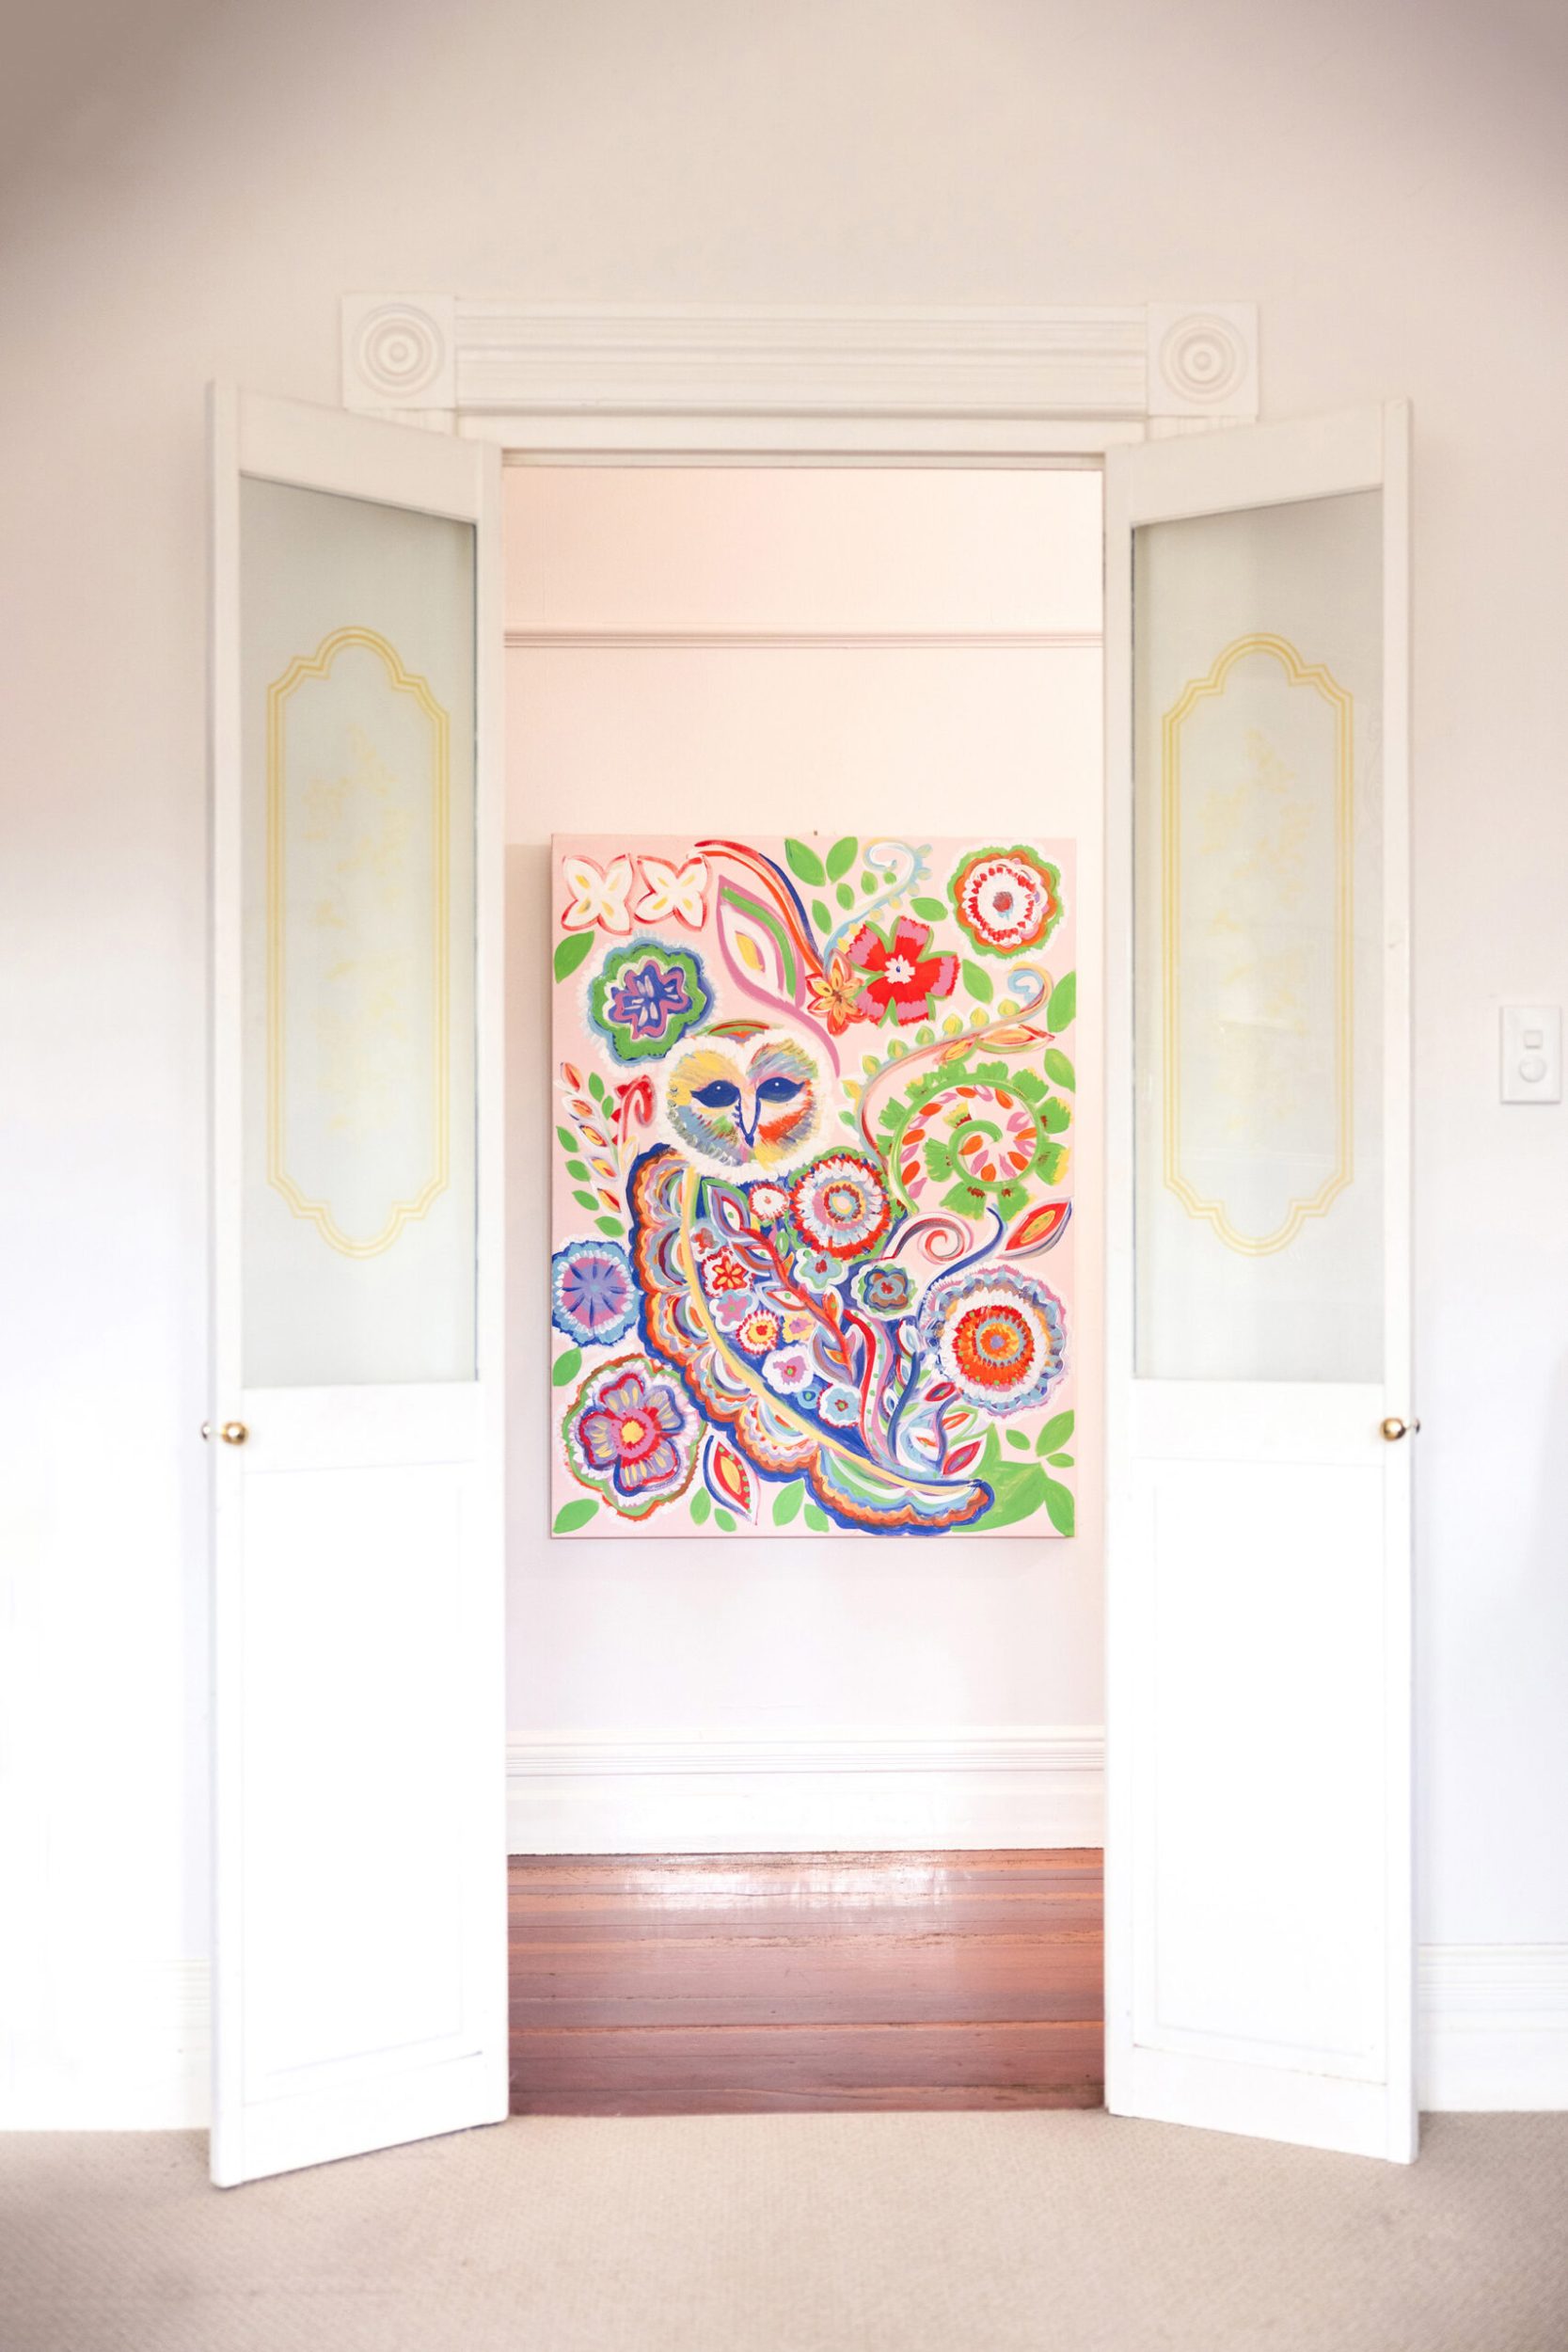 Open double doors in a tall white room showing a large colourful artwork featuring an owl